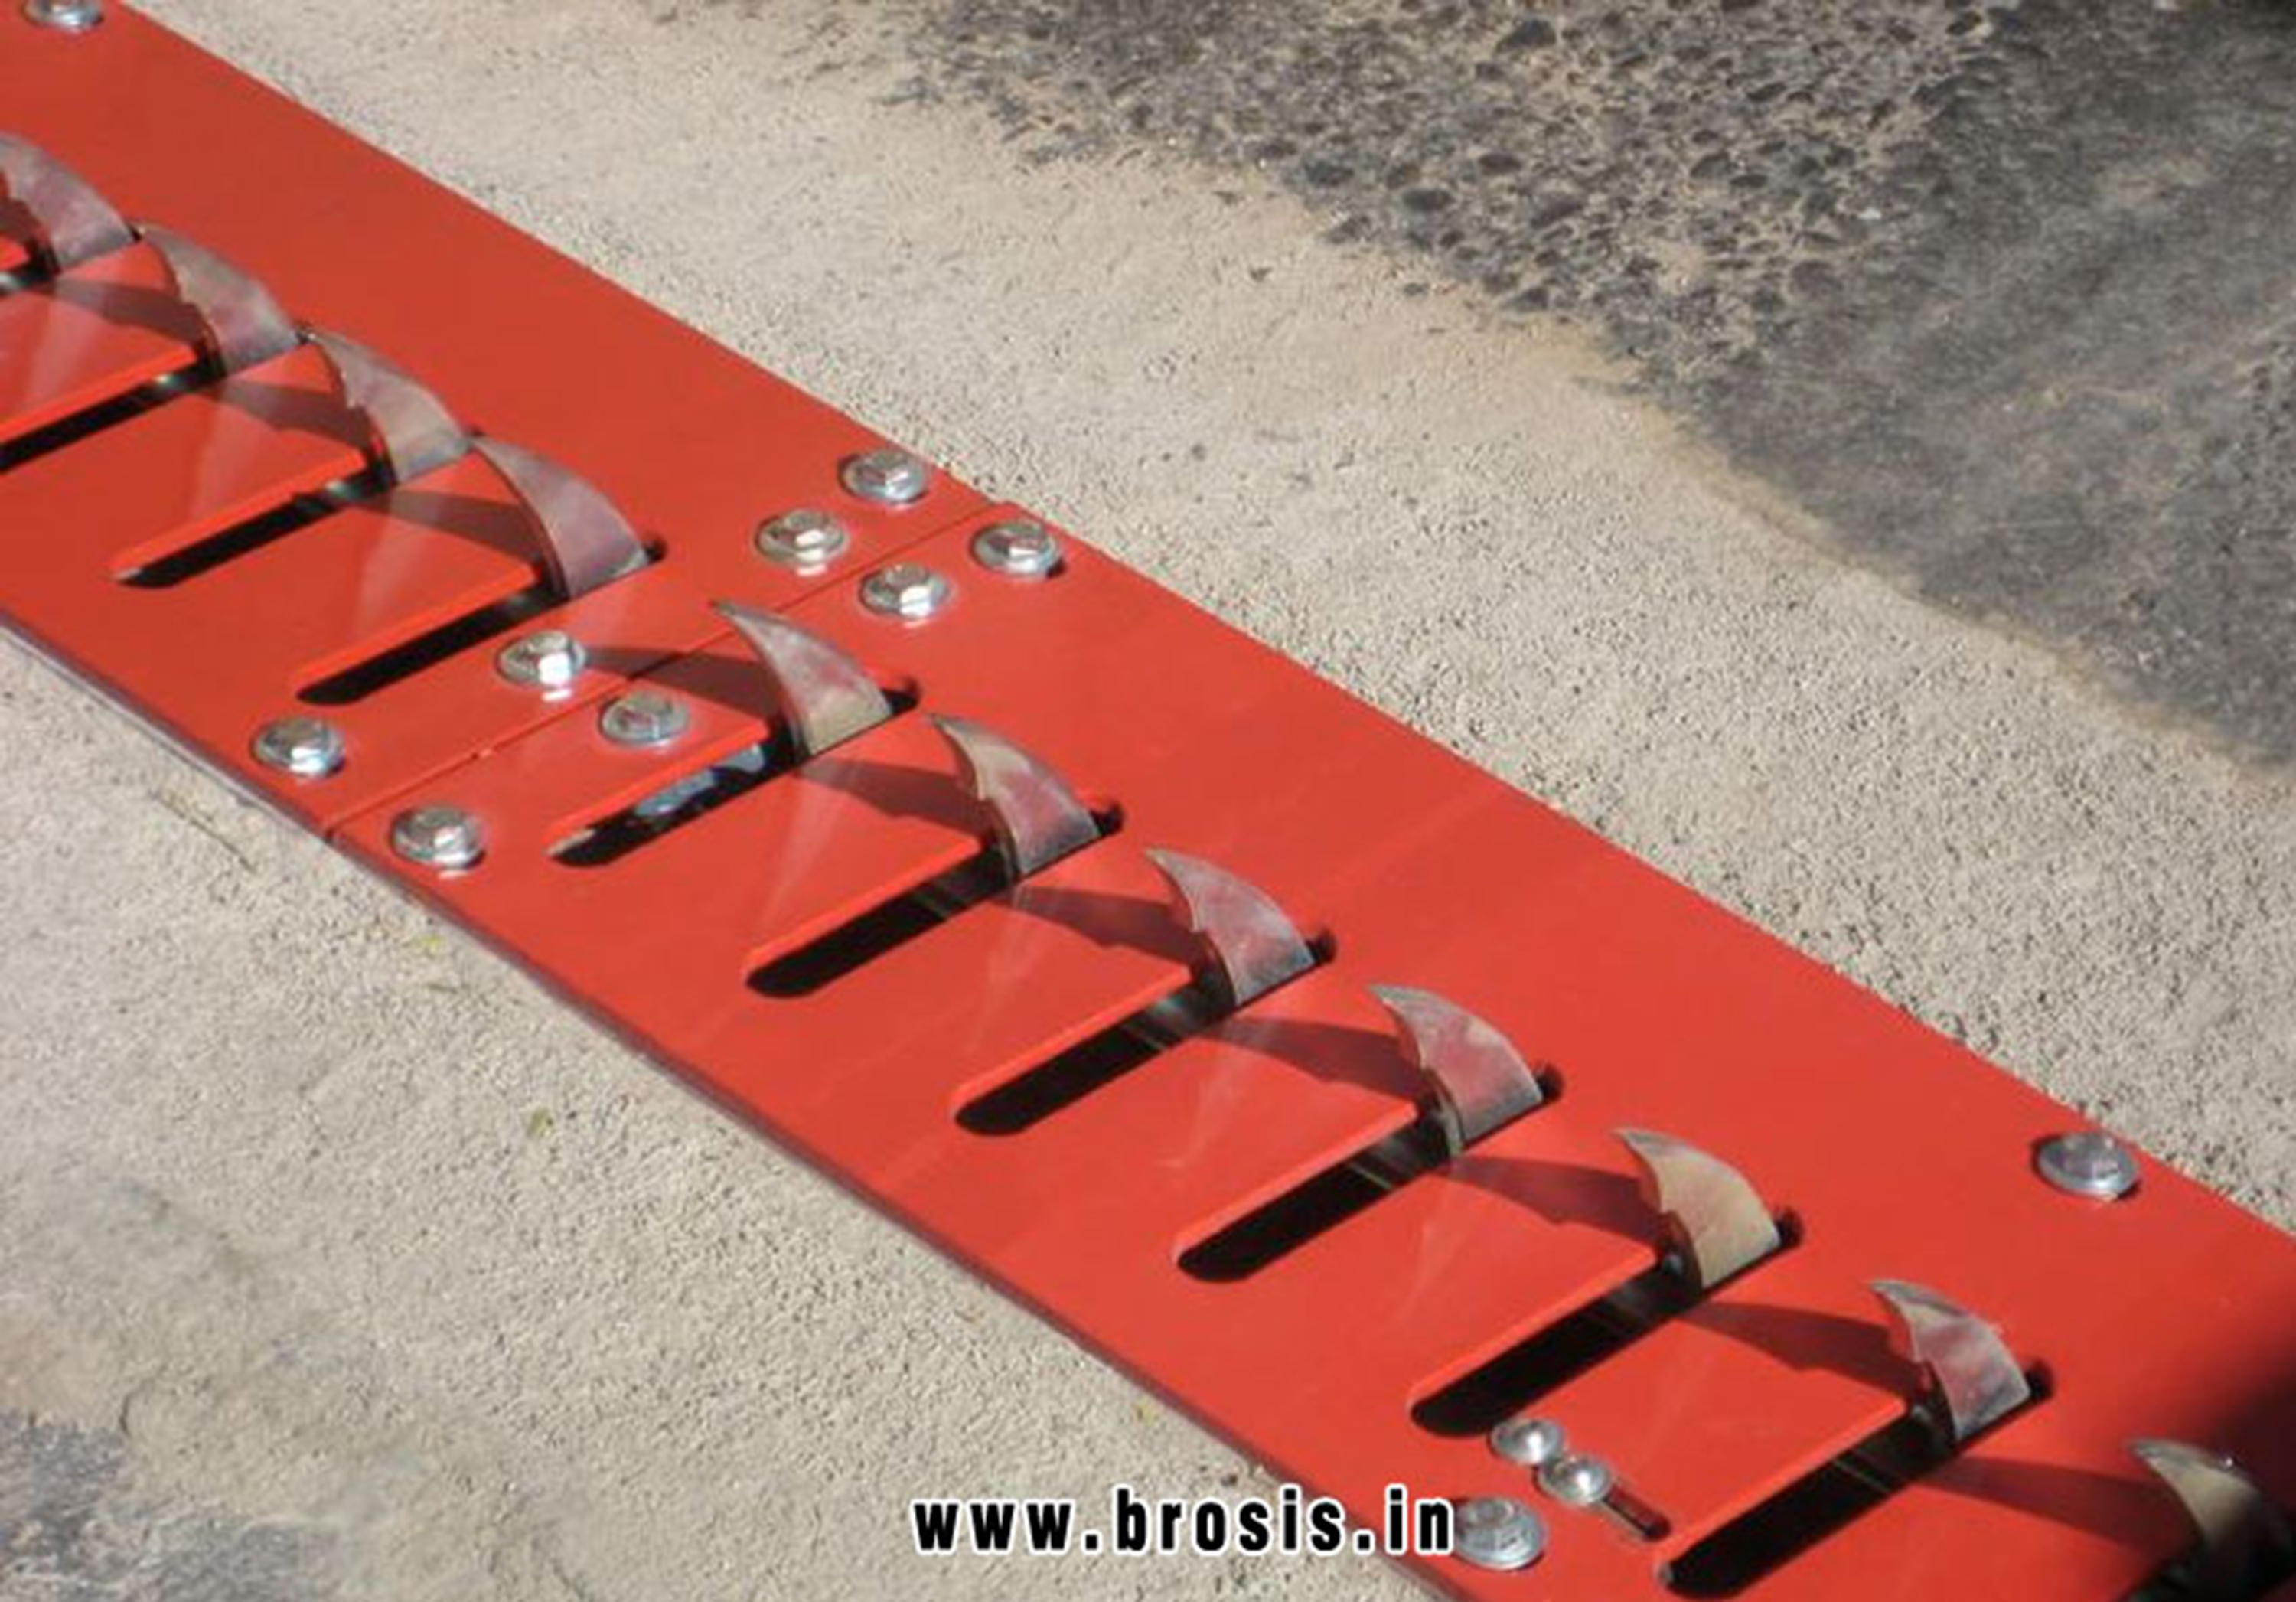 ONEWAY BARRIER manufacturers exporters in India Punjab Ludhiana